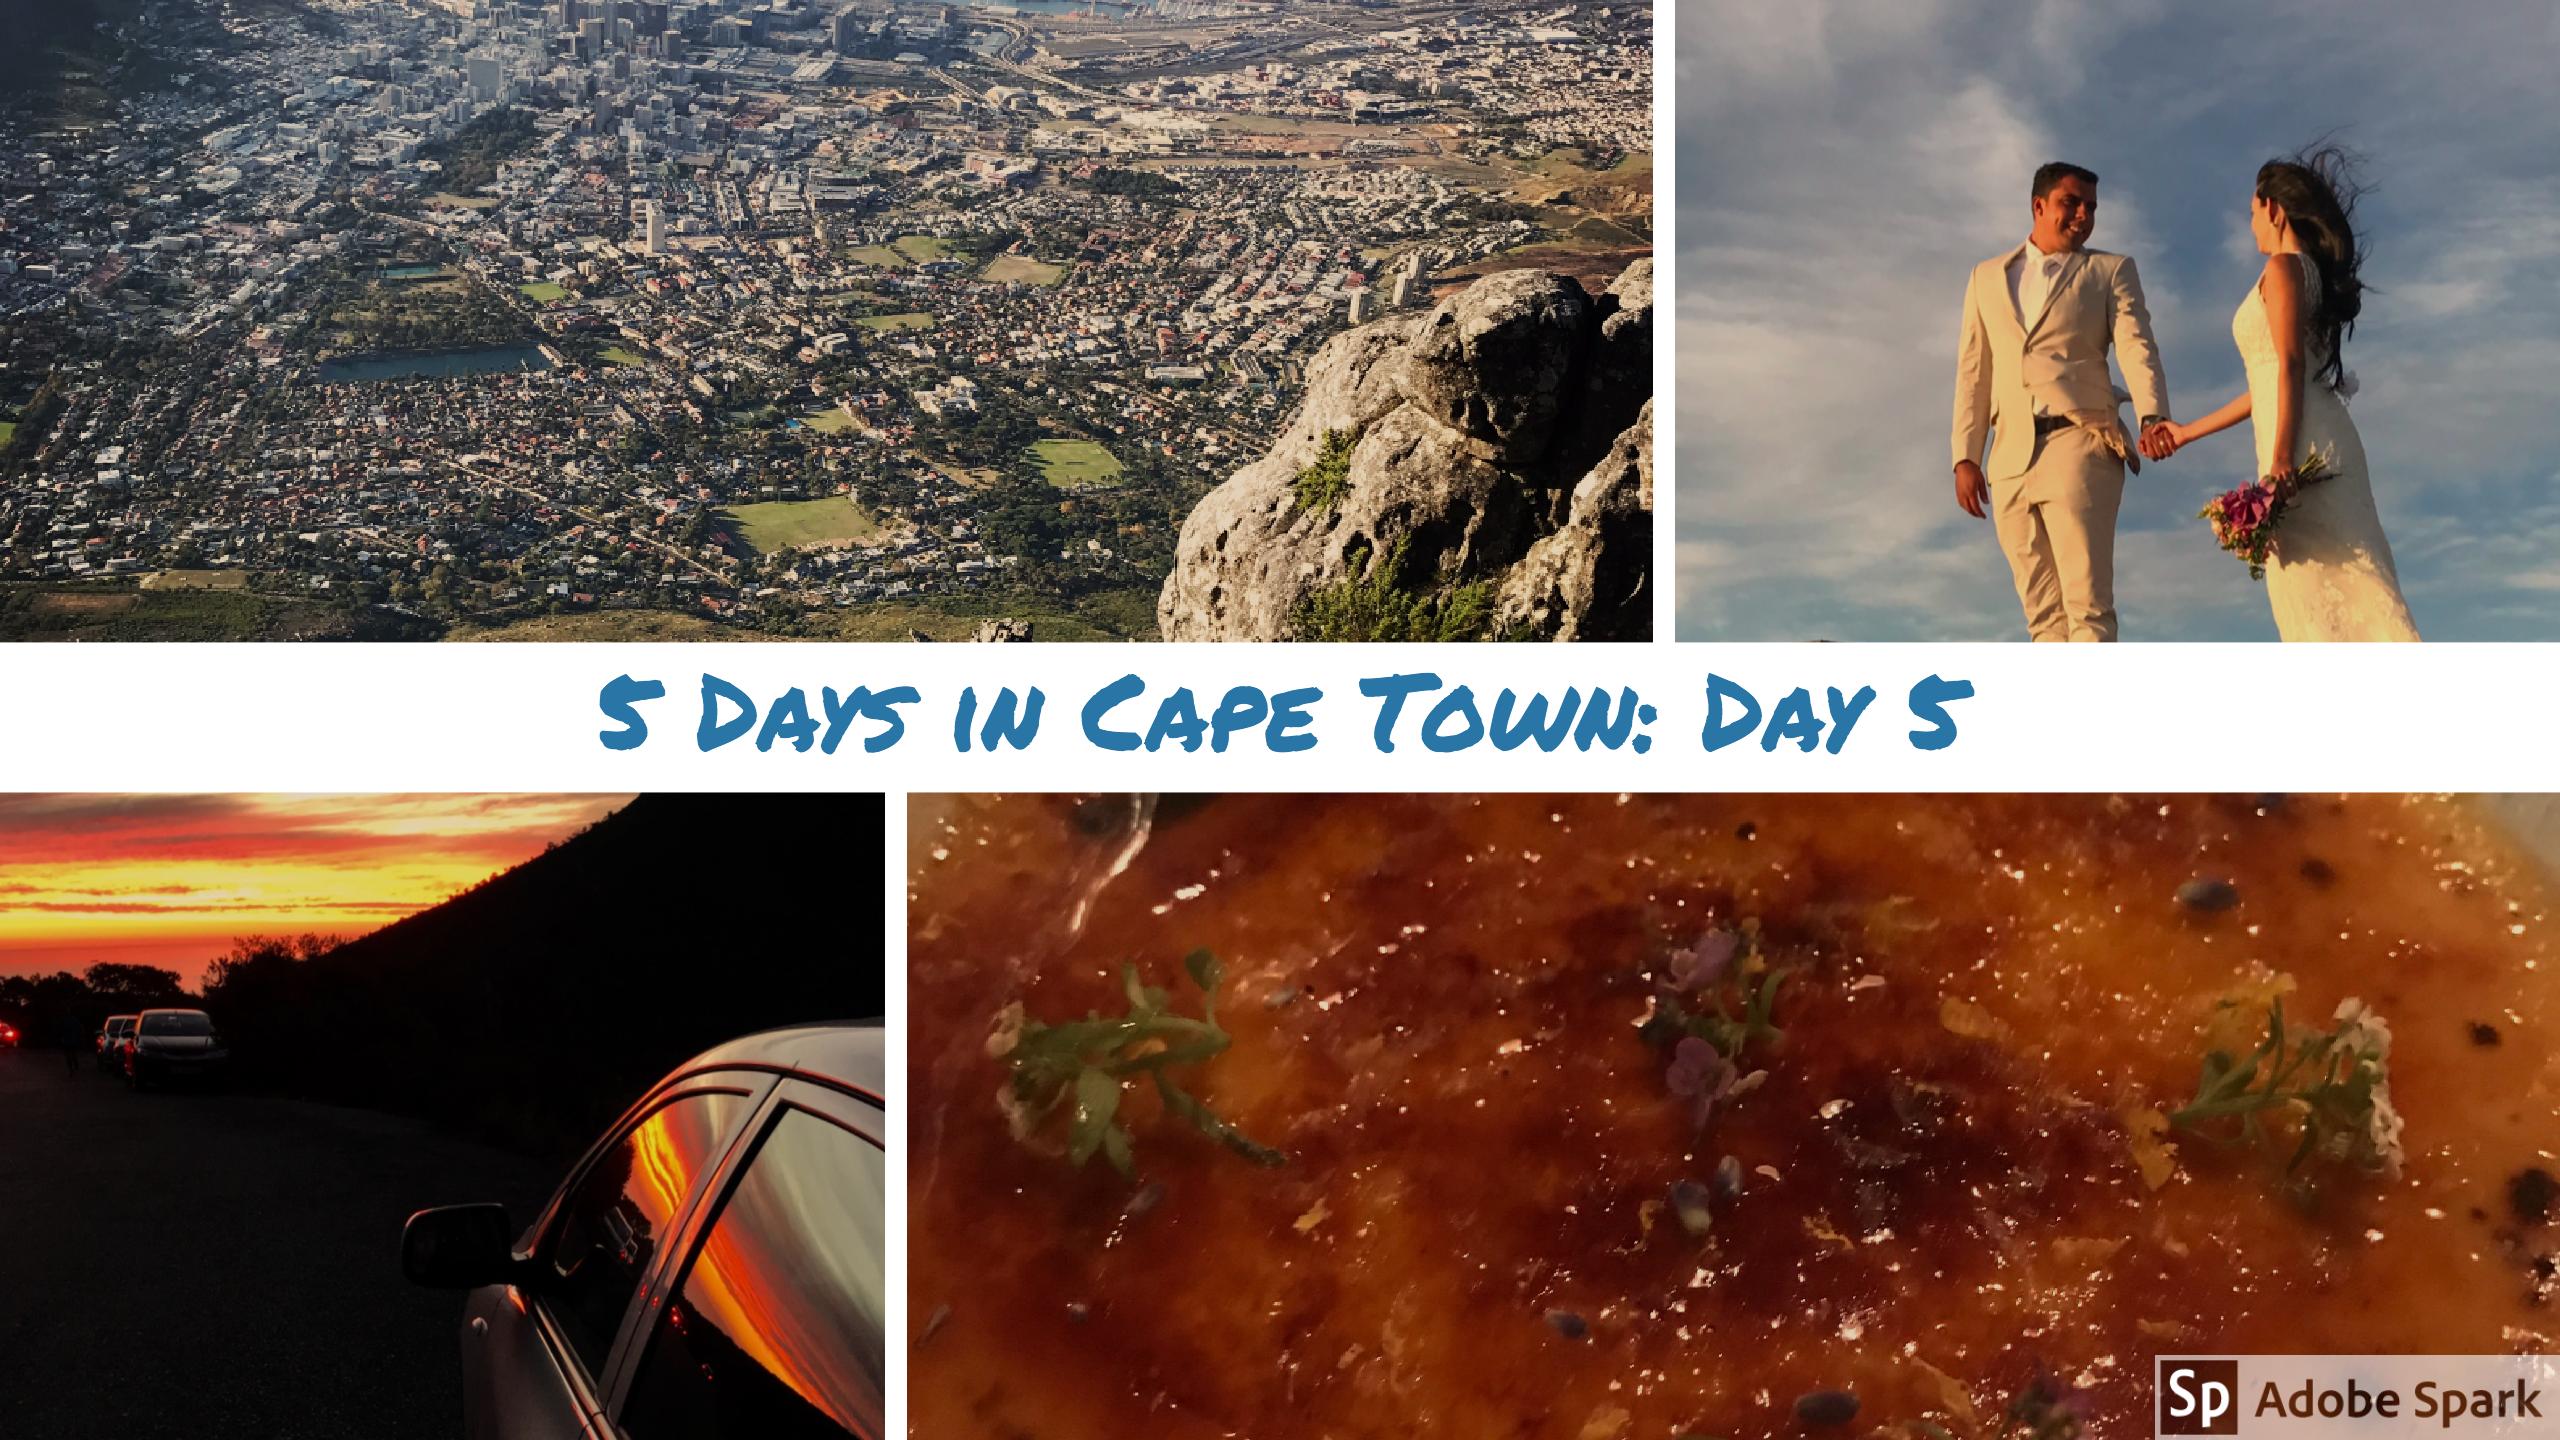 5 days in Cape Town: Day 5